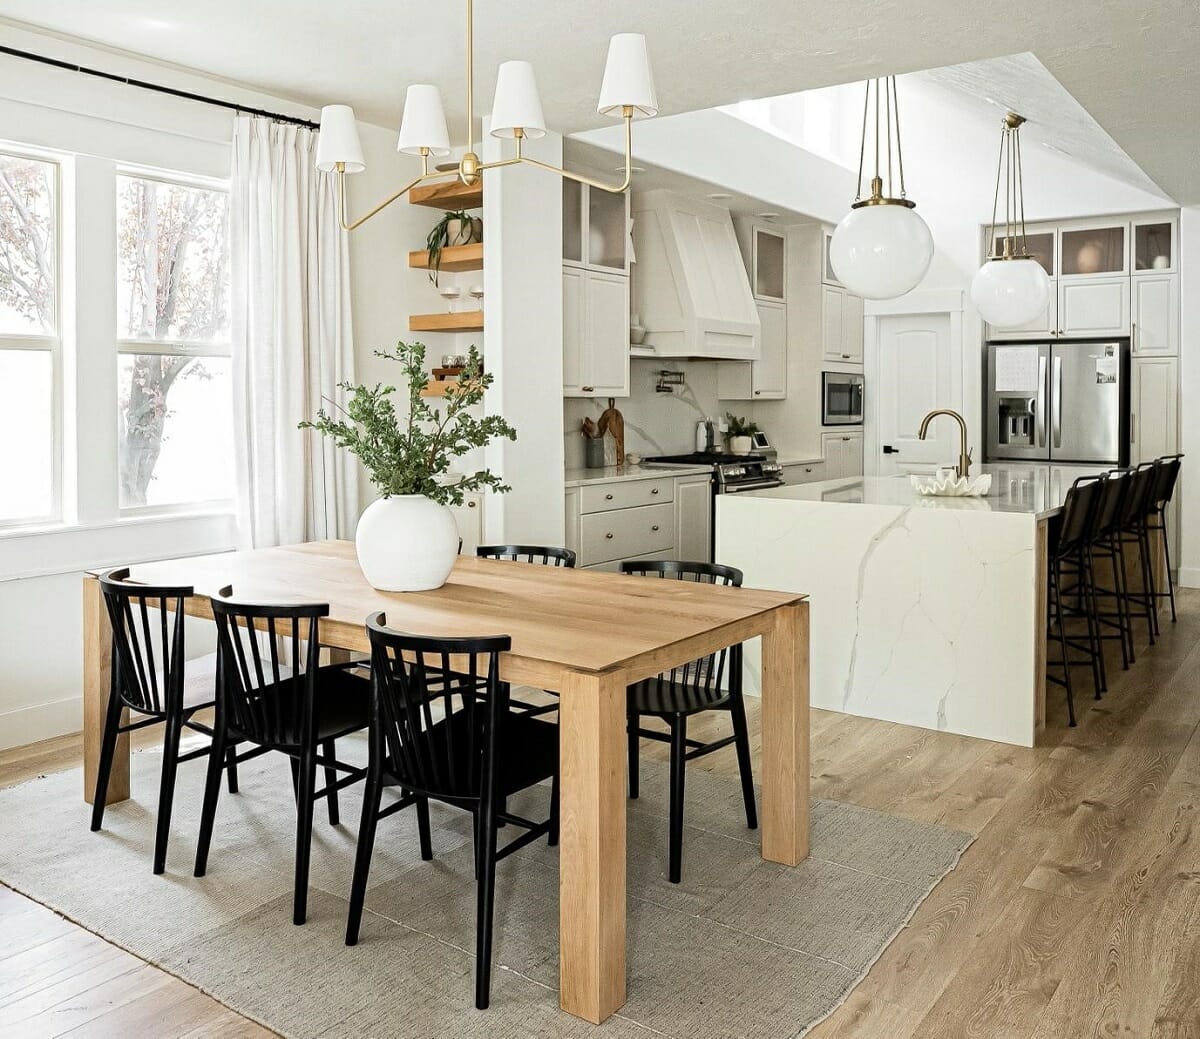 Eat in galley kitchen counter with a modern farmhouse style